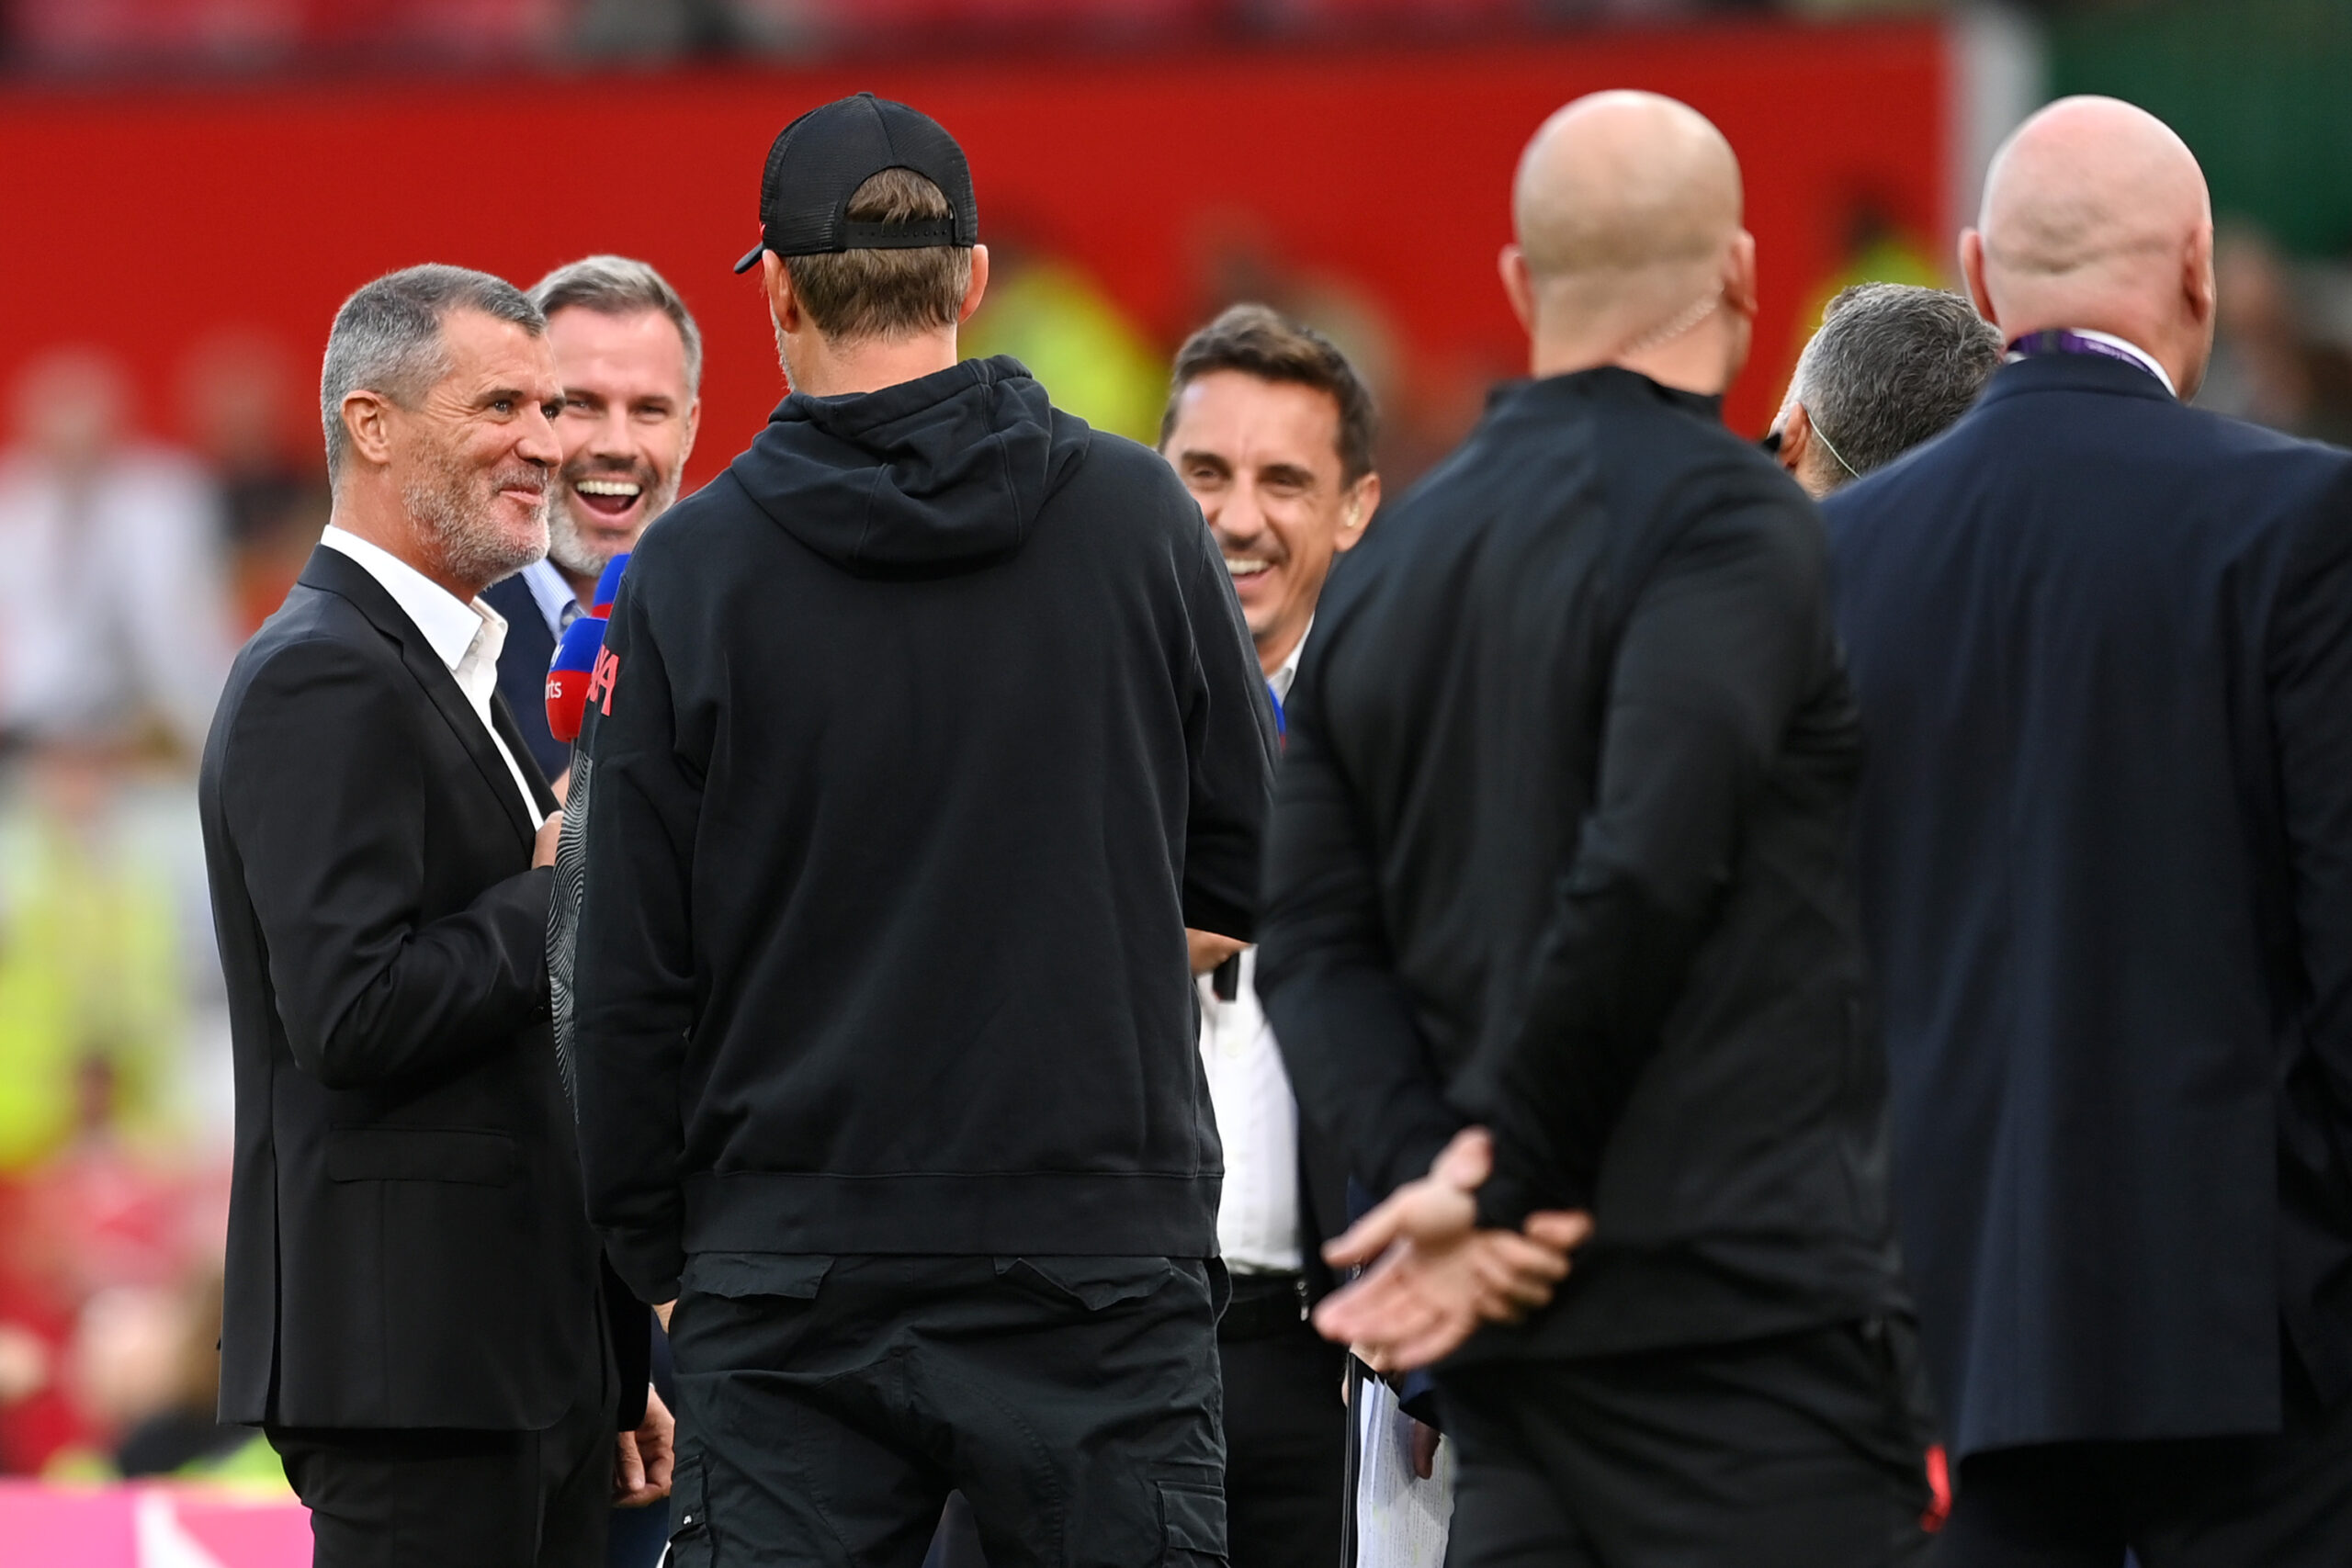 Ian Wright, Roy Keane, and Jamie Carragher predict Man City win over Man United in FA Cup final